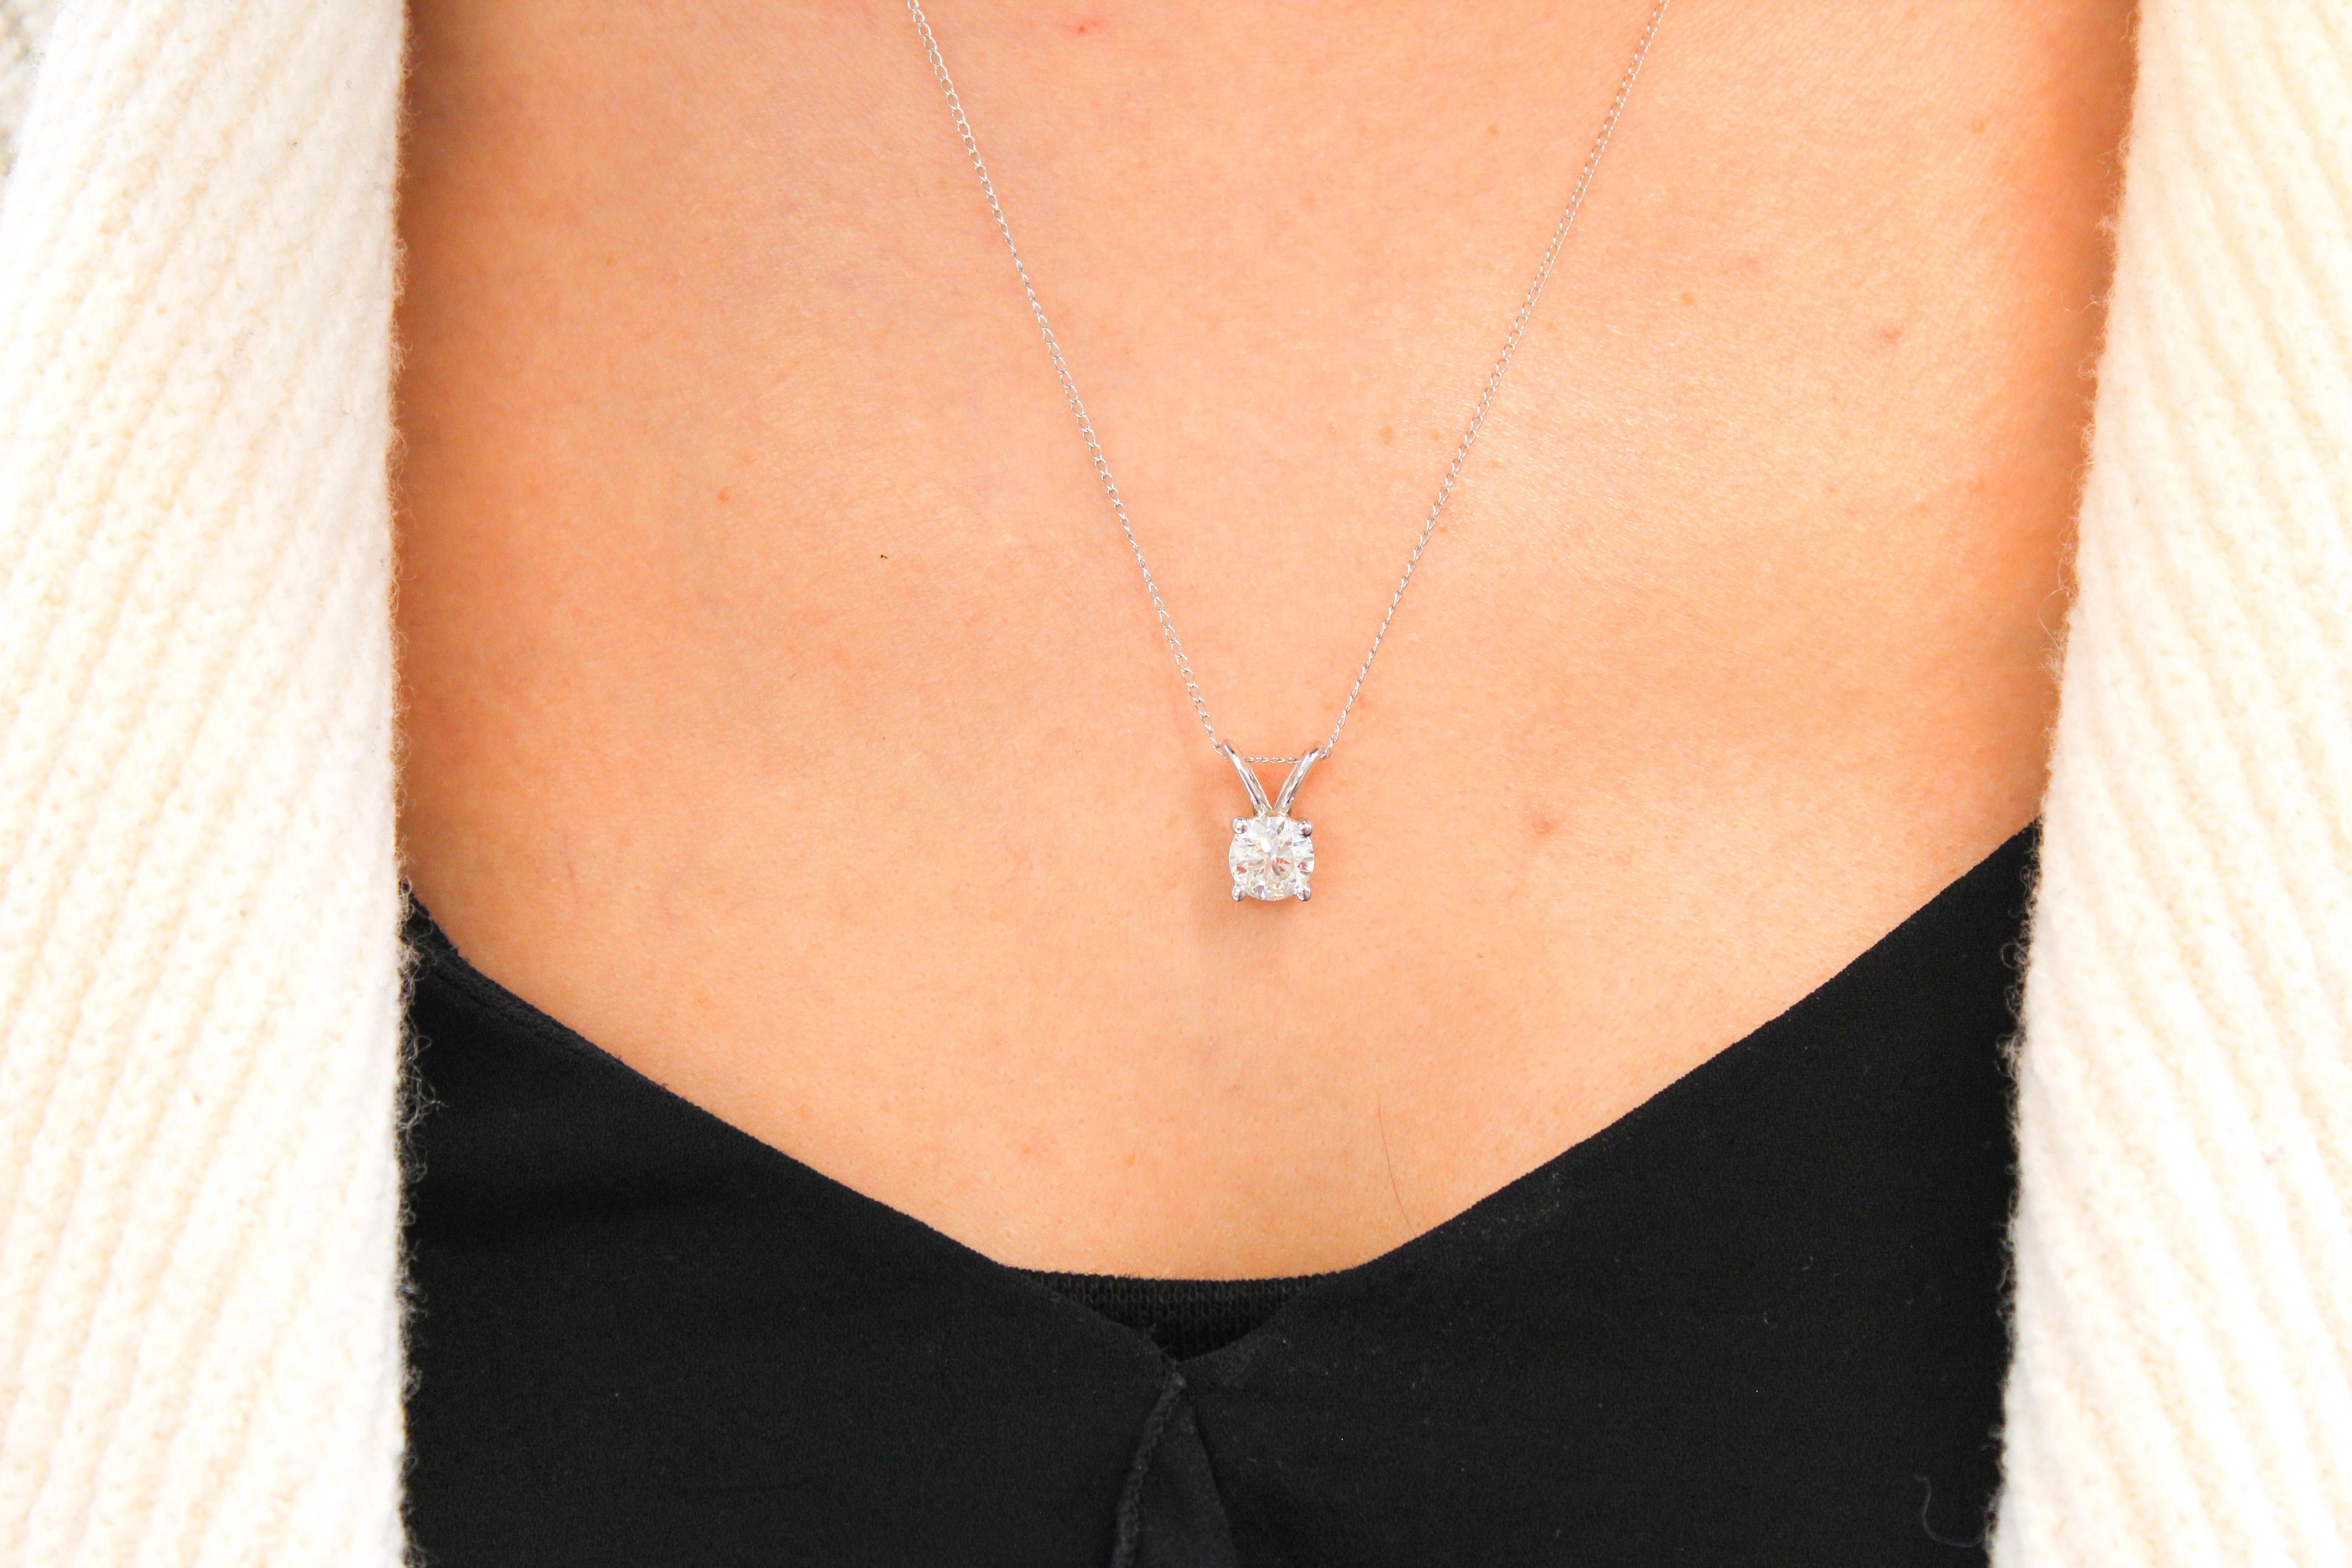 This impressive diamond solitaire pendant is finely crafted in brightly polished 14 karat white gold and features a round shaped 0.25 carat diamond that has SI clarity, gracefully prong set on a shiny split bail. Ideal as an anniversary or birthday